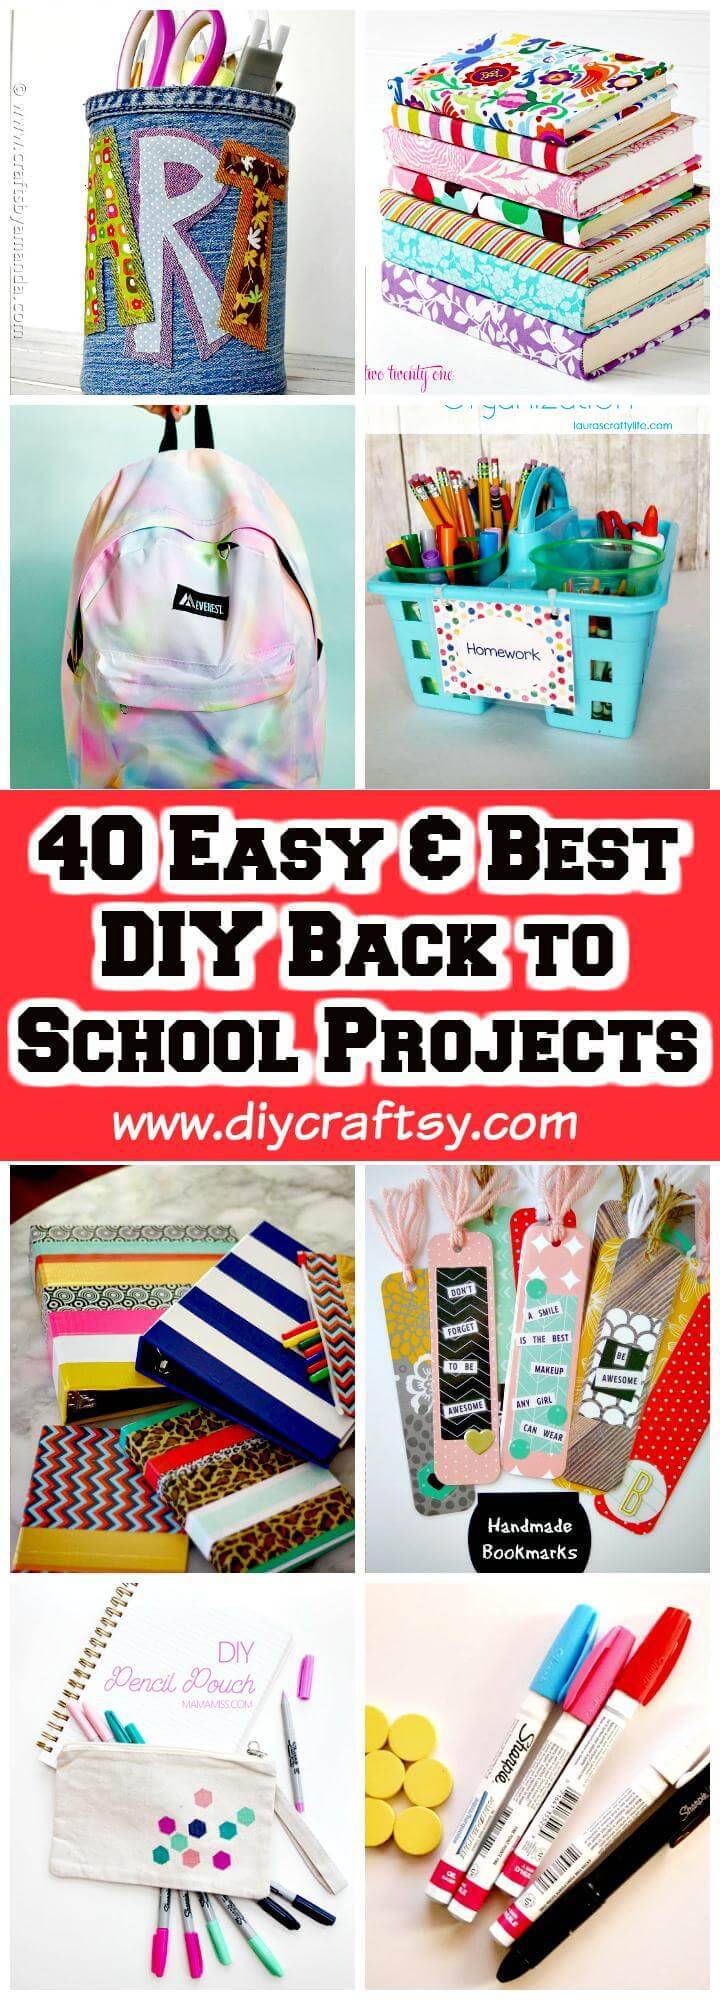 40 Easy Best Diy Back To School Projects Crafts